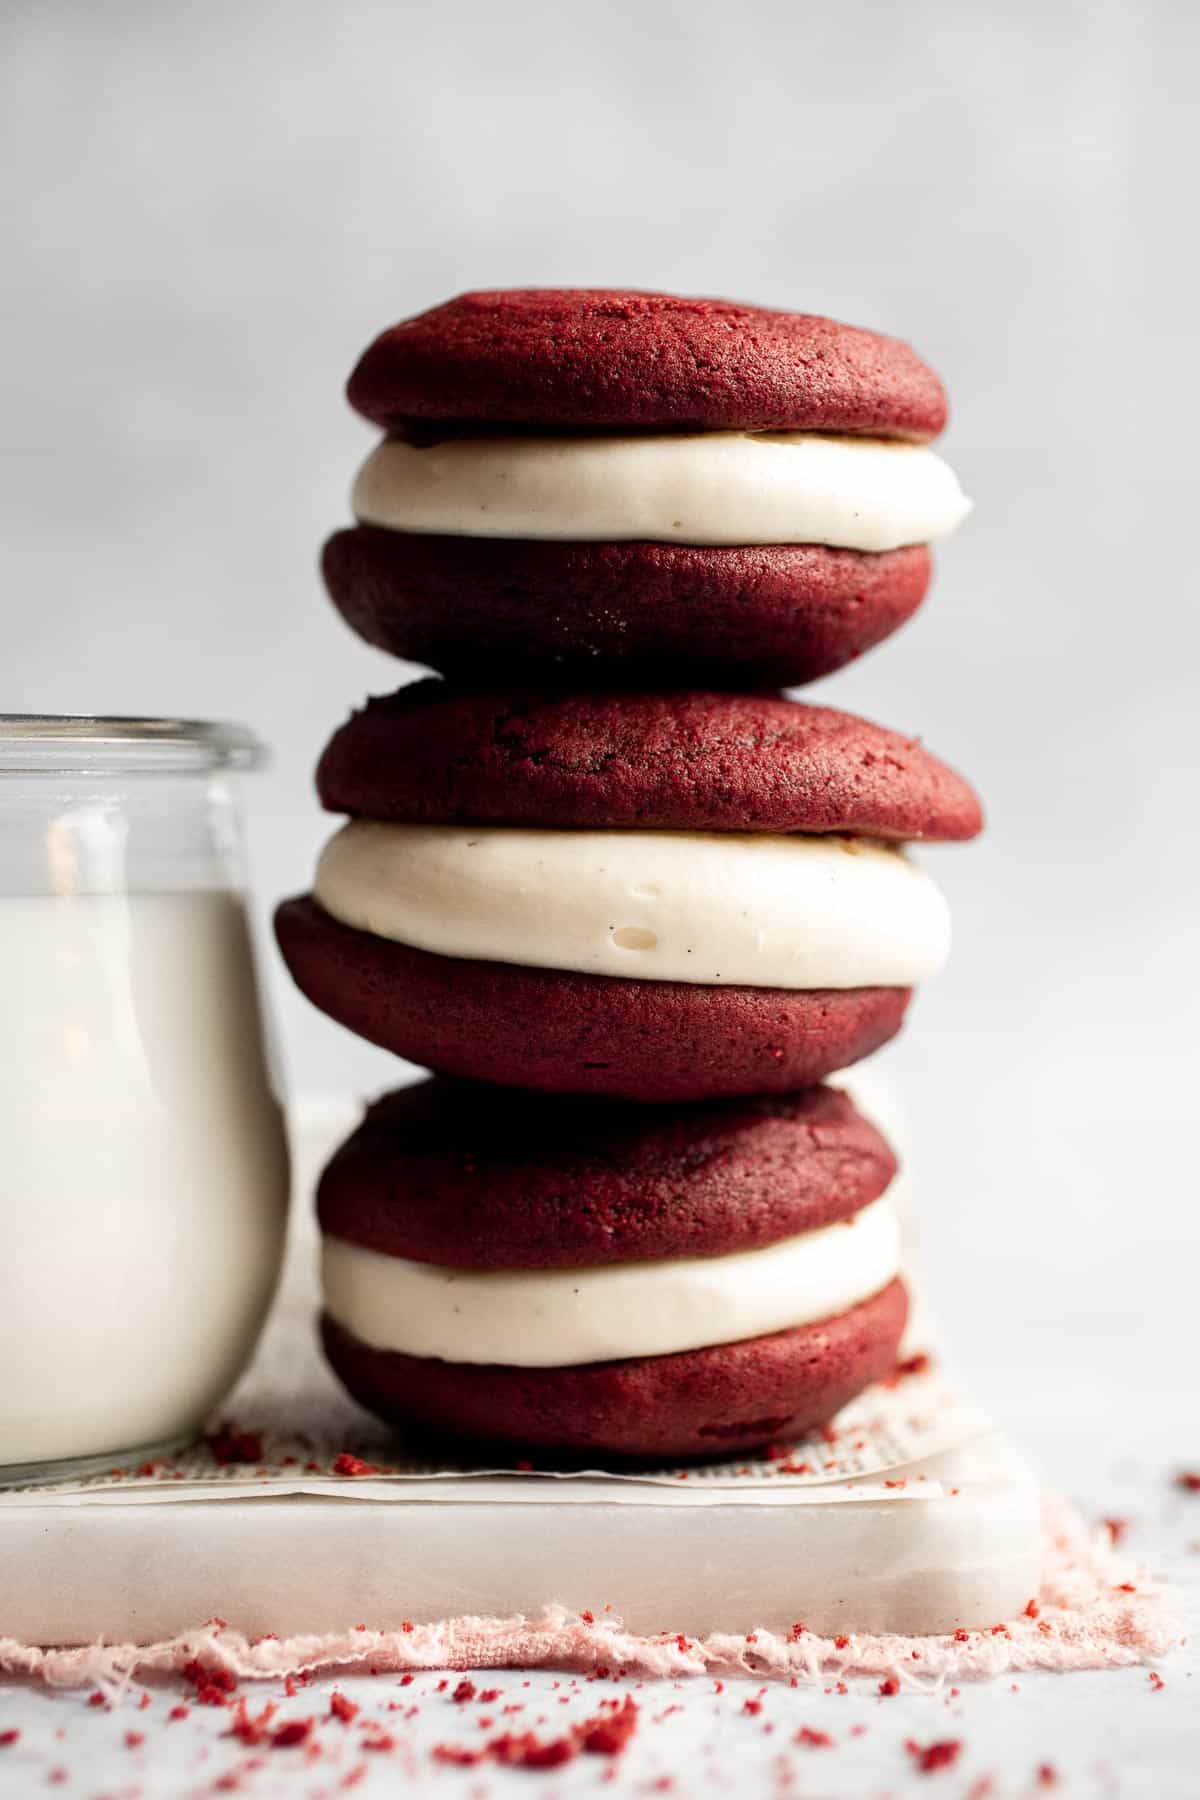 These fluffy Red Velvet Whoopie Pies are made with two soft and moist cake-like cookies, filled with a decadent cream cheese frosting in the middle. | aheadofthyme.com